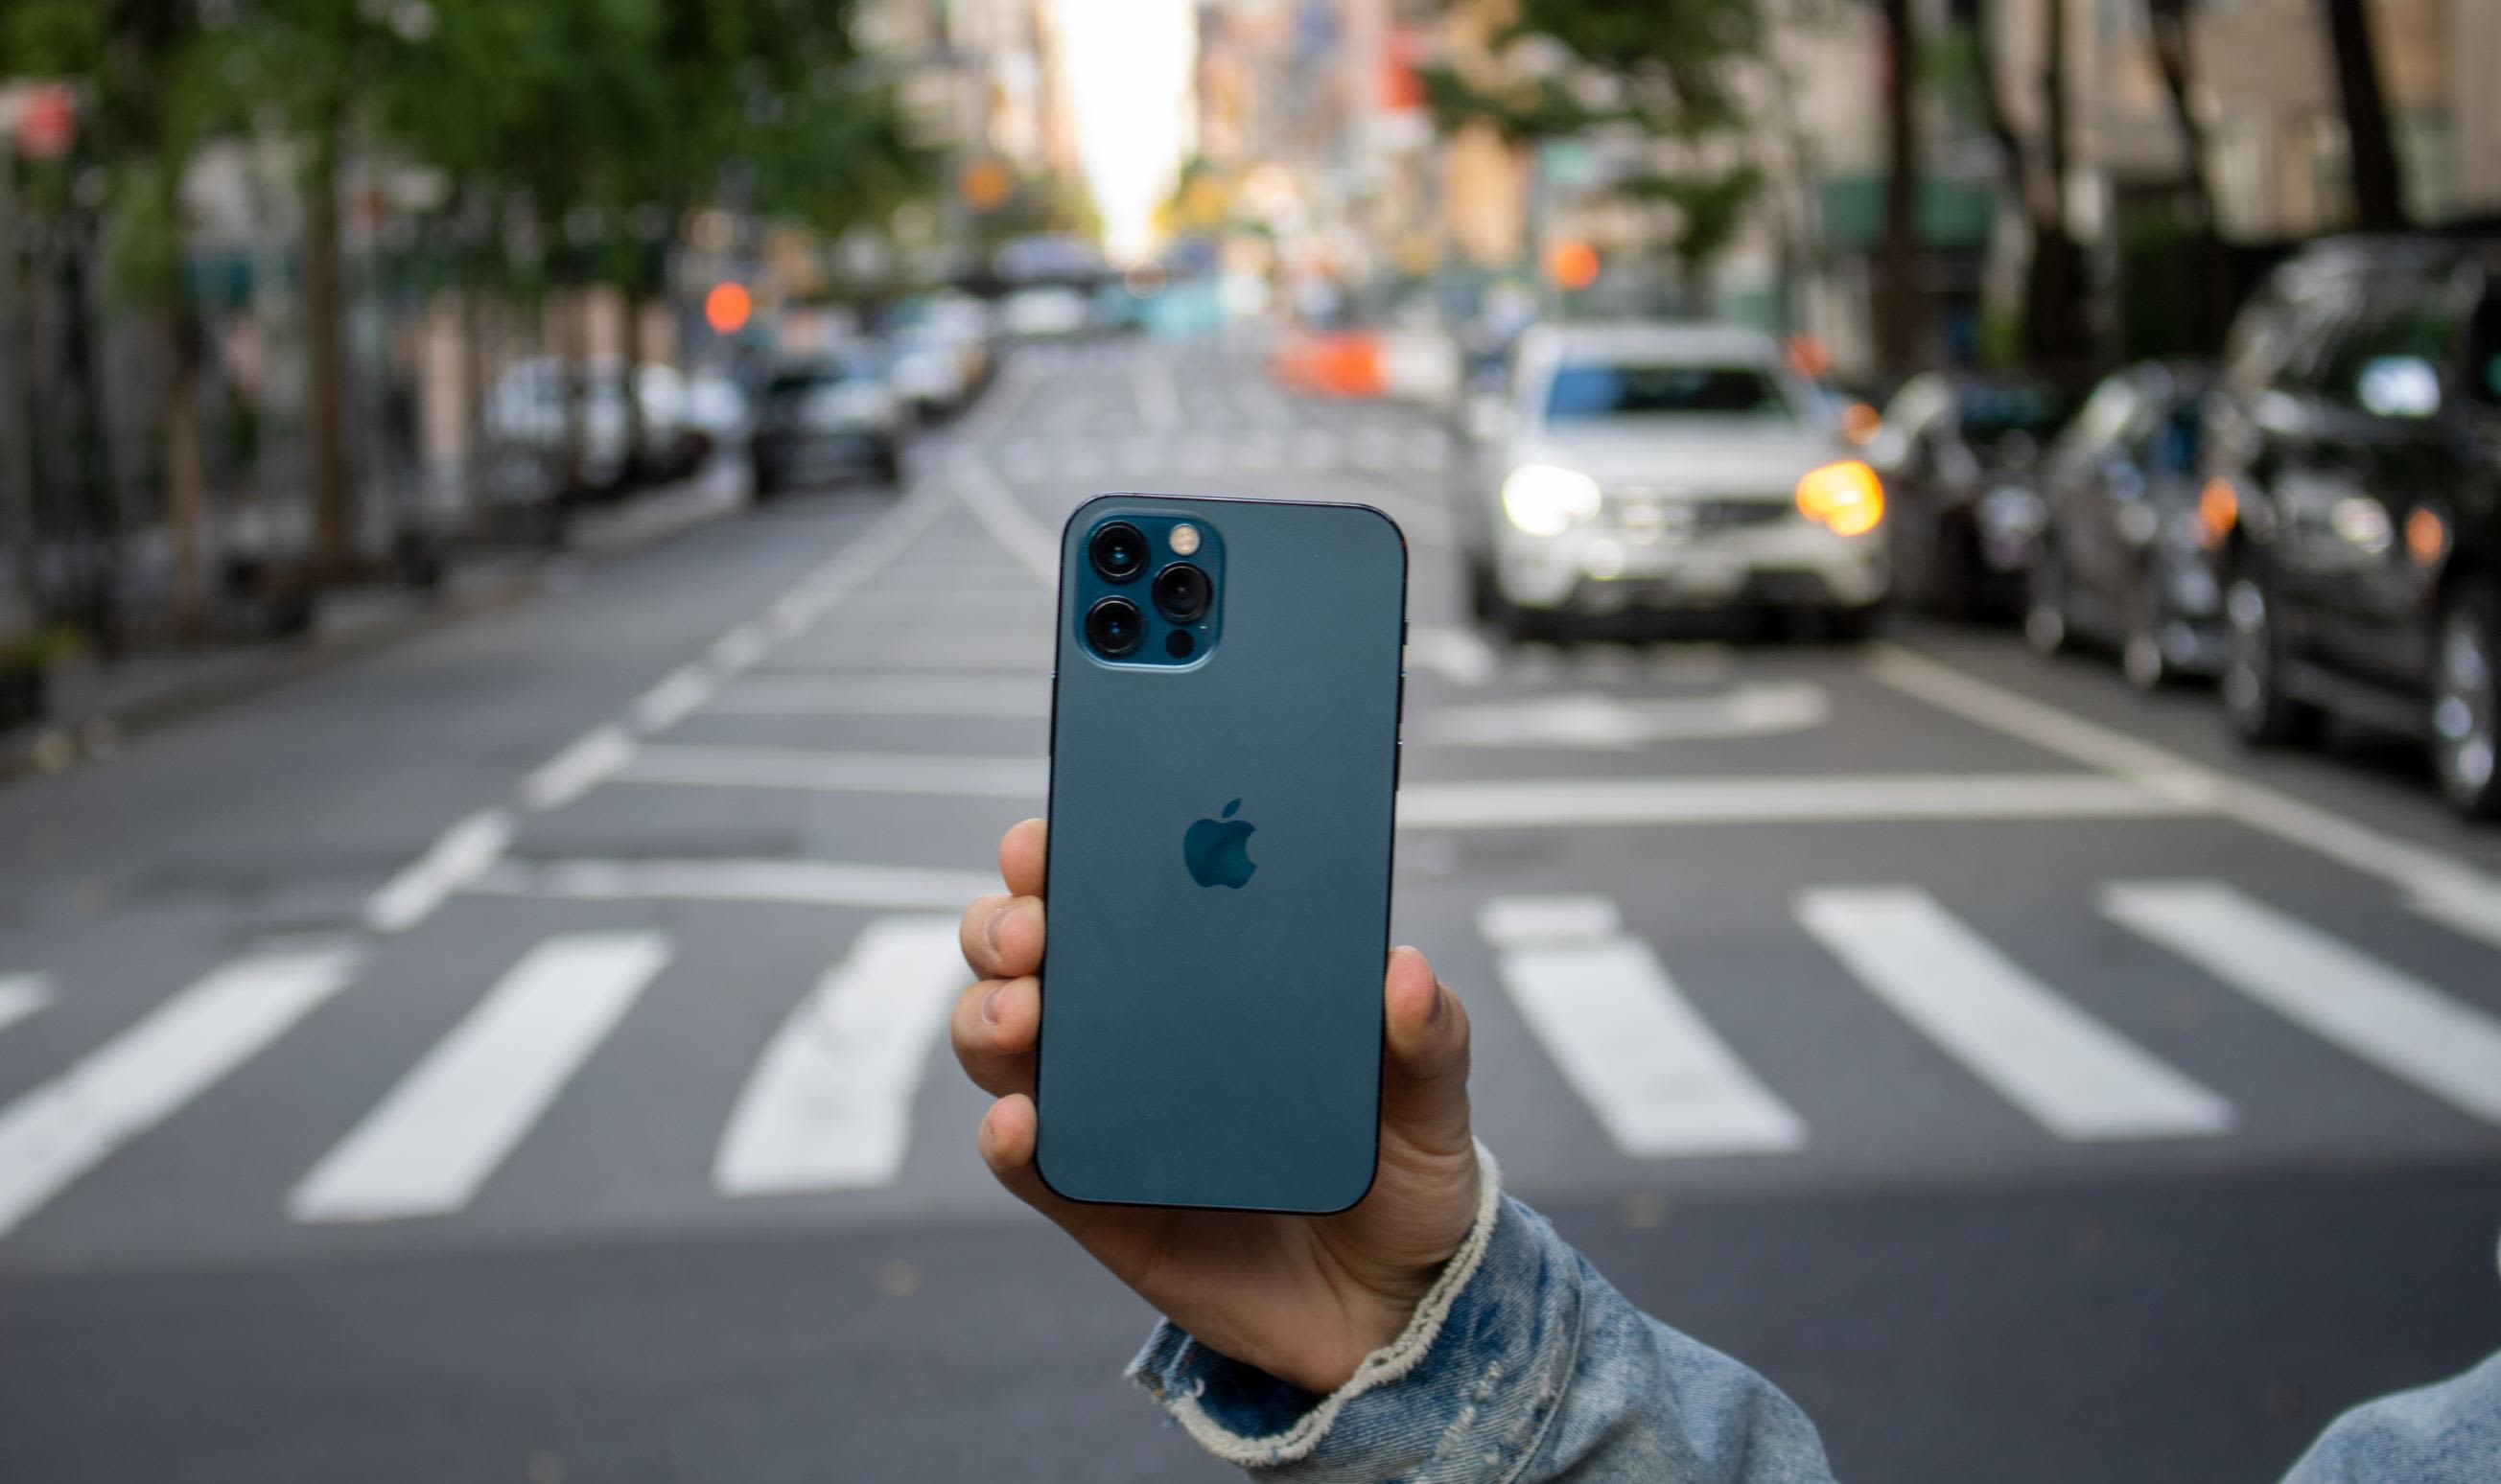 iPhone 12 Pro Max review: If you make an investment this year, let this be  it